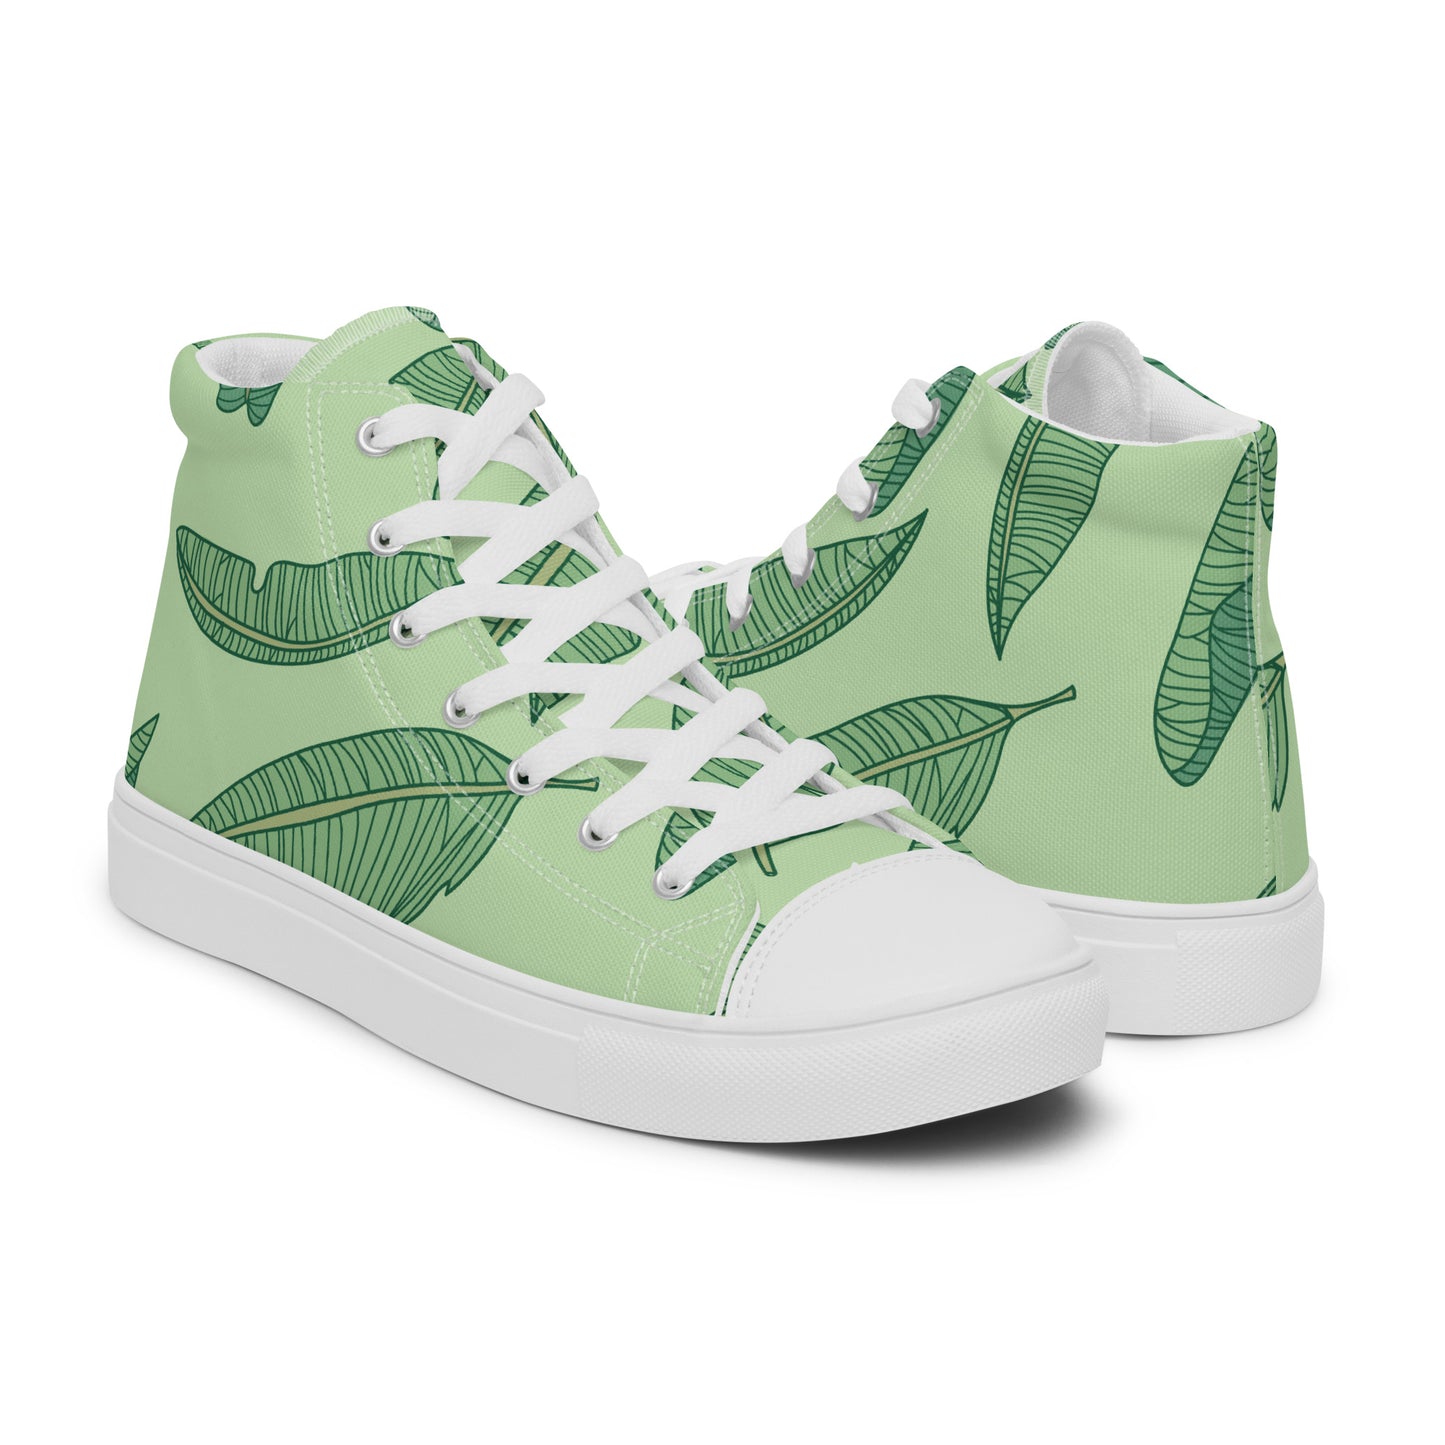 Banana Leaves - Sustainably Made Men's High Top Canvas Shoes